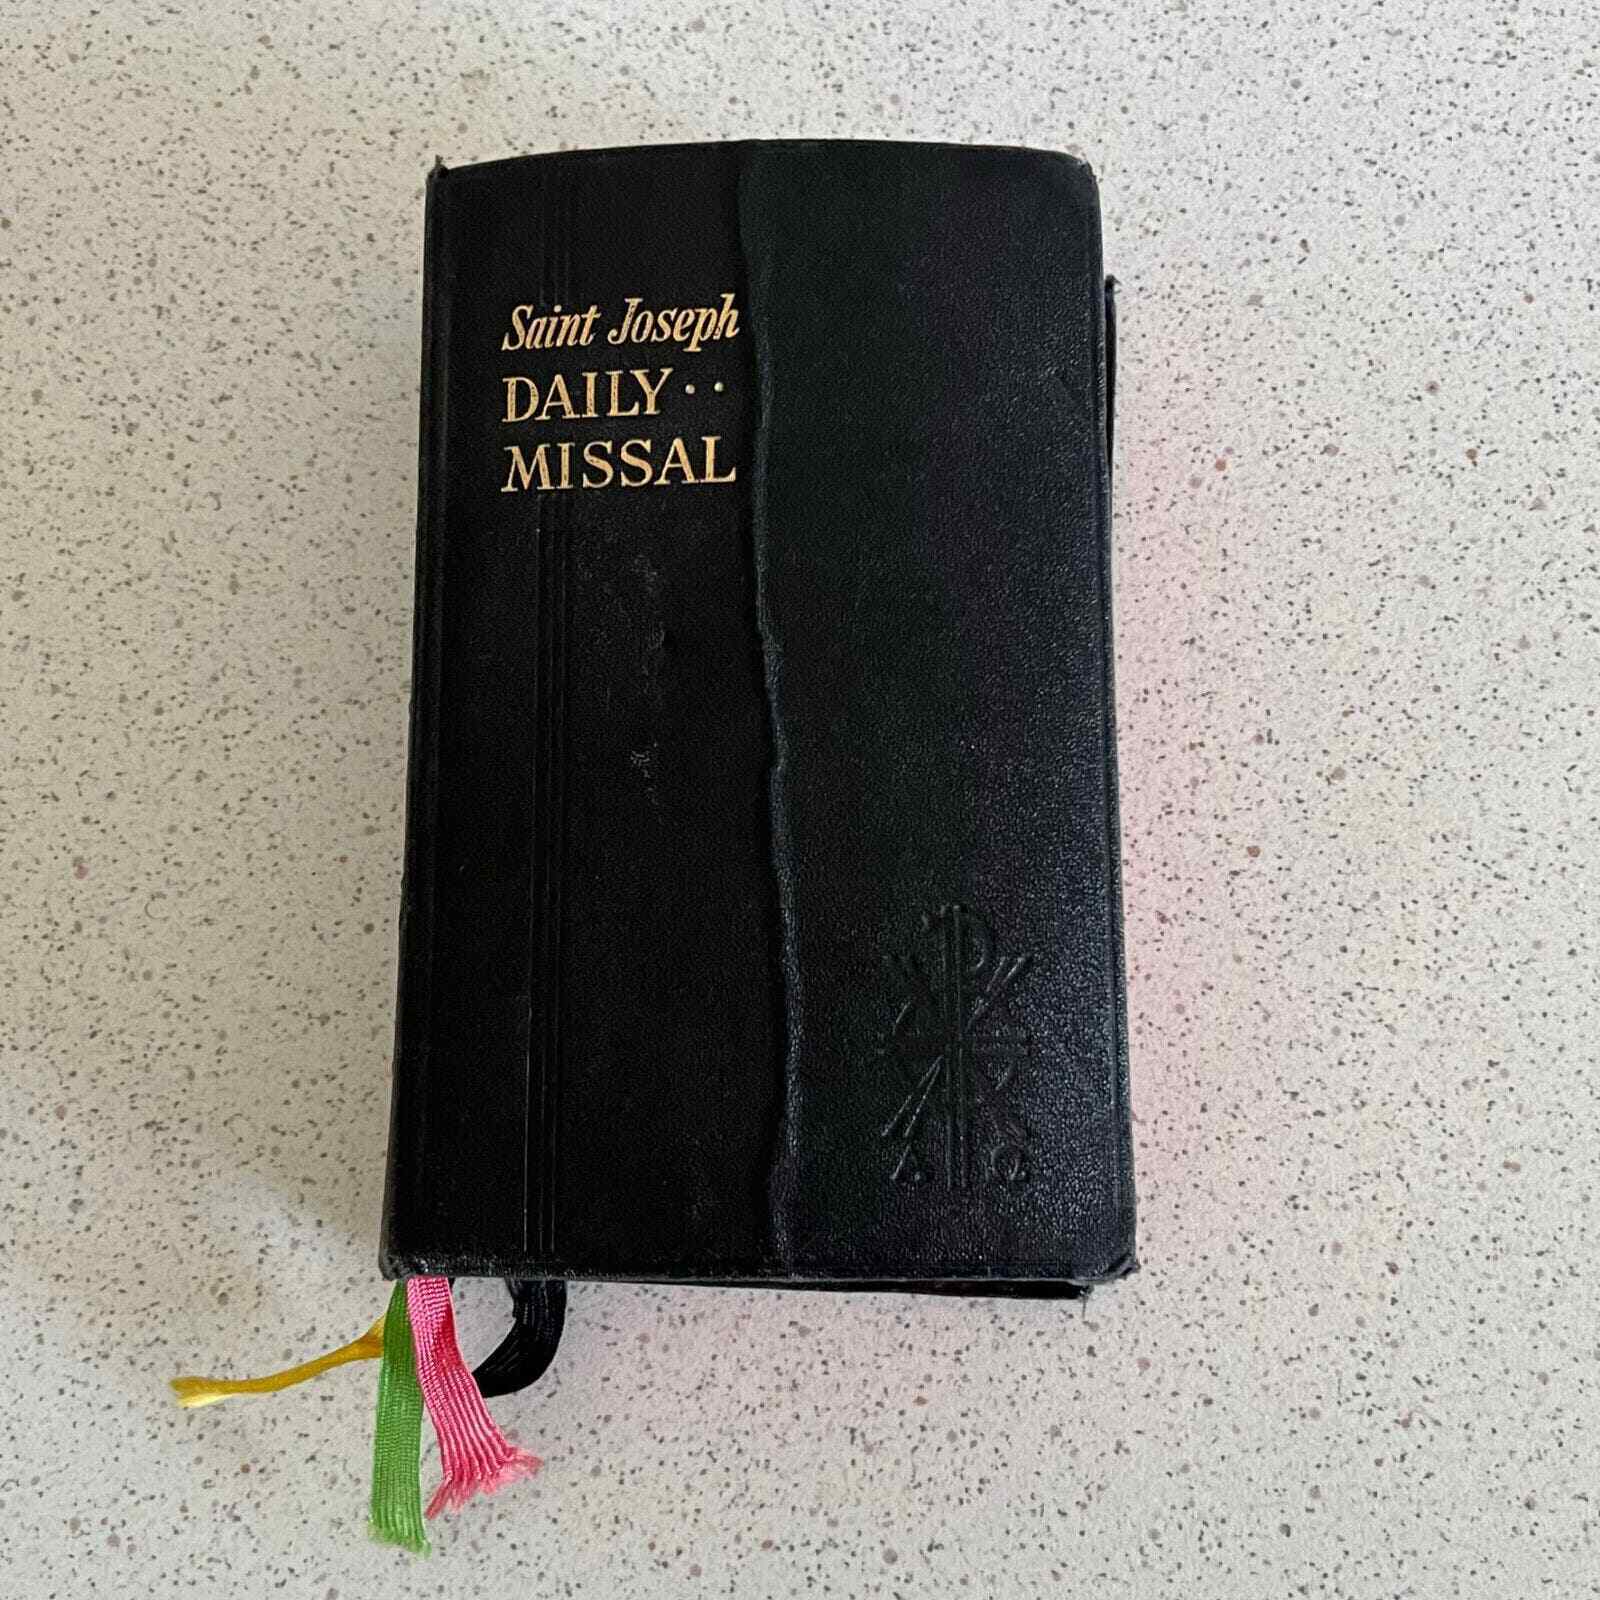 Vintage 1956 Saint Joseph Daily Missal Religious Book Confraternity Edition